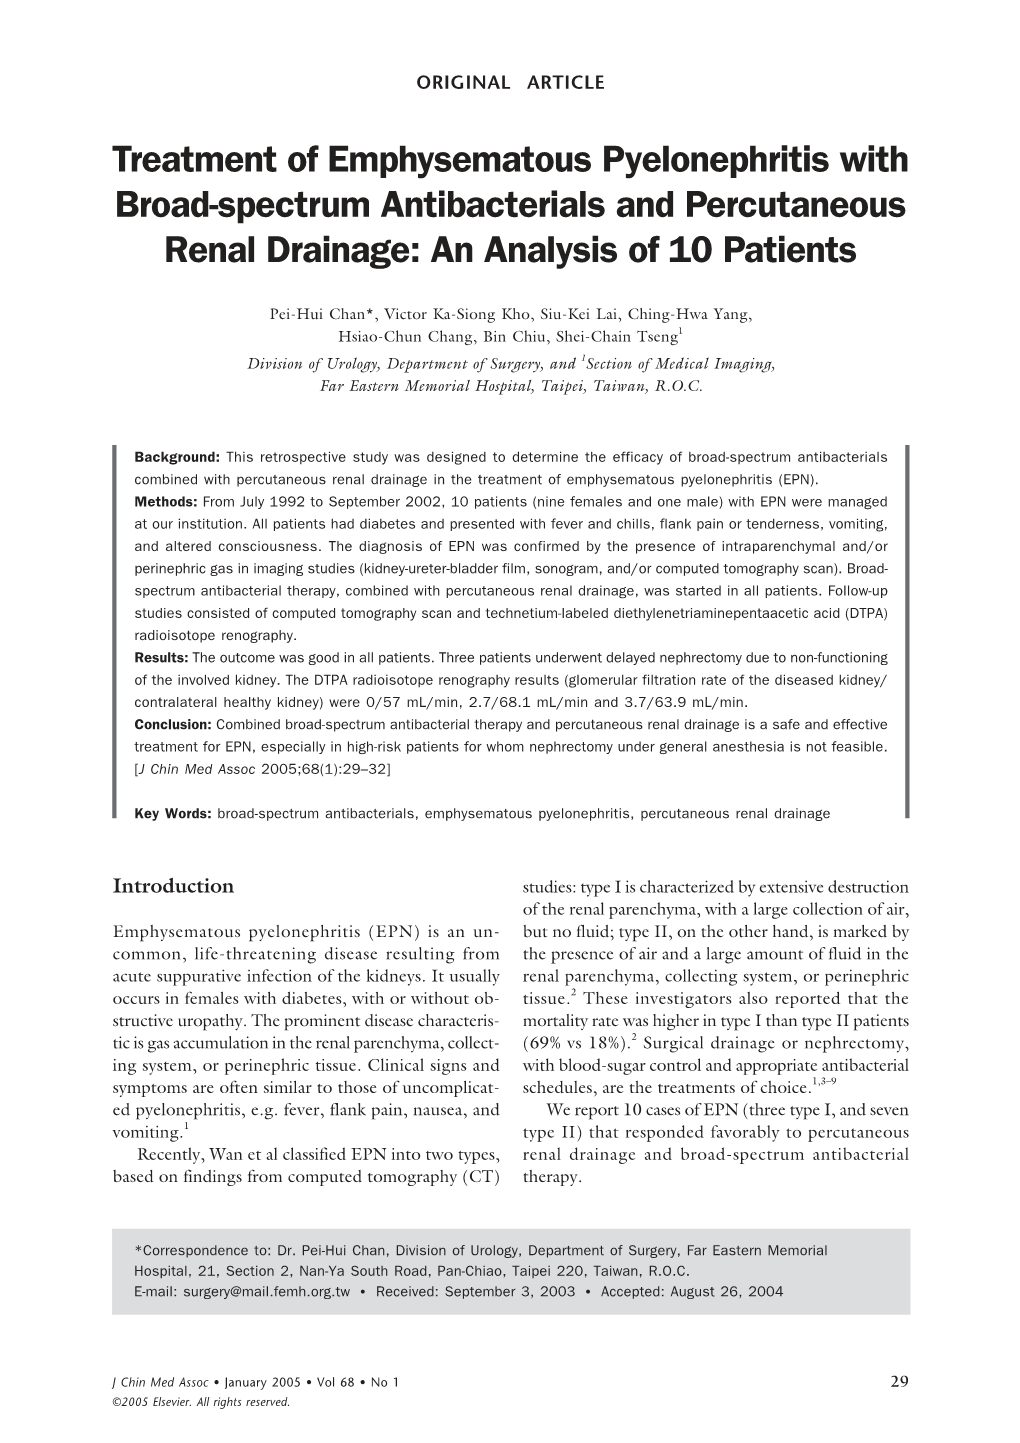 Treatment of Emphysematous Pyelonephritis with Broad-Spectrum Antibacterials and Percutaneous Renal Drainage: an Analysis of 10 Patients